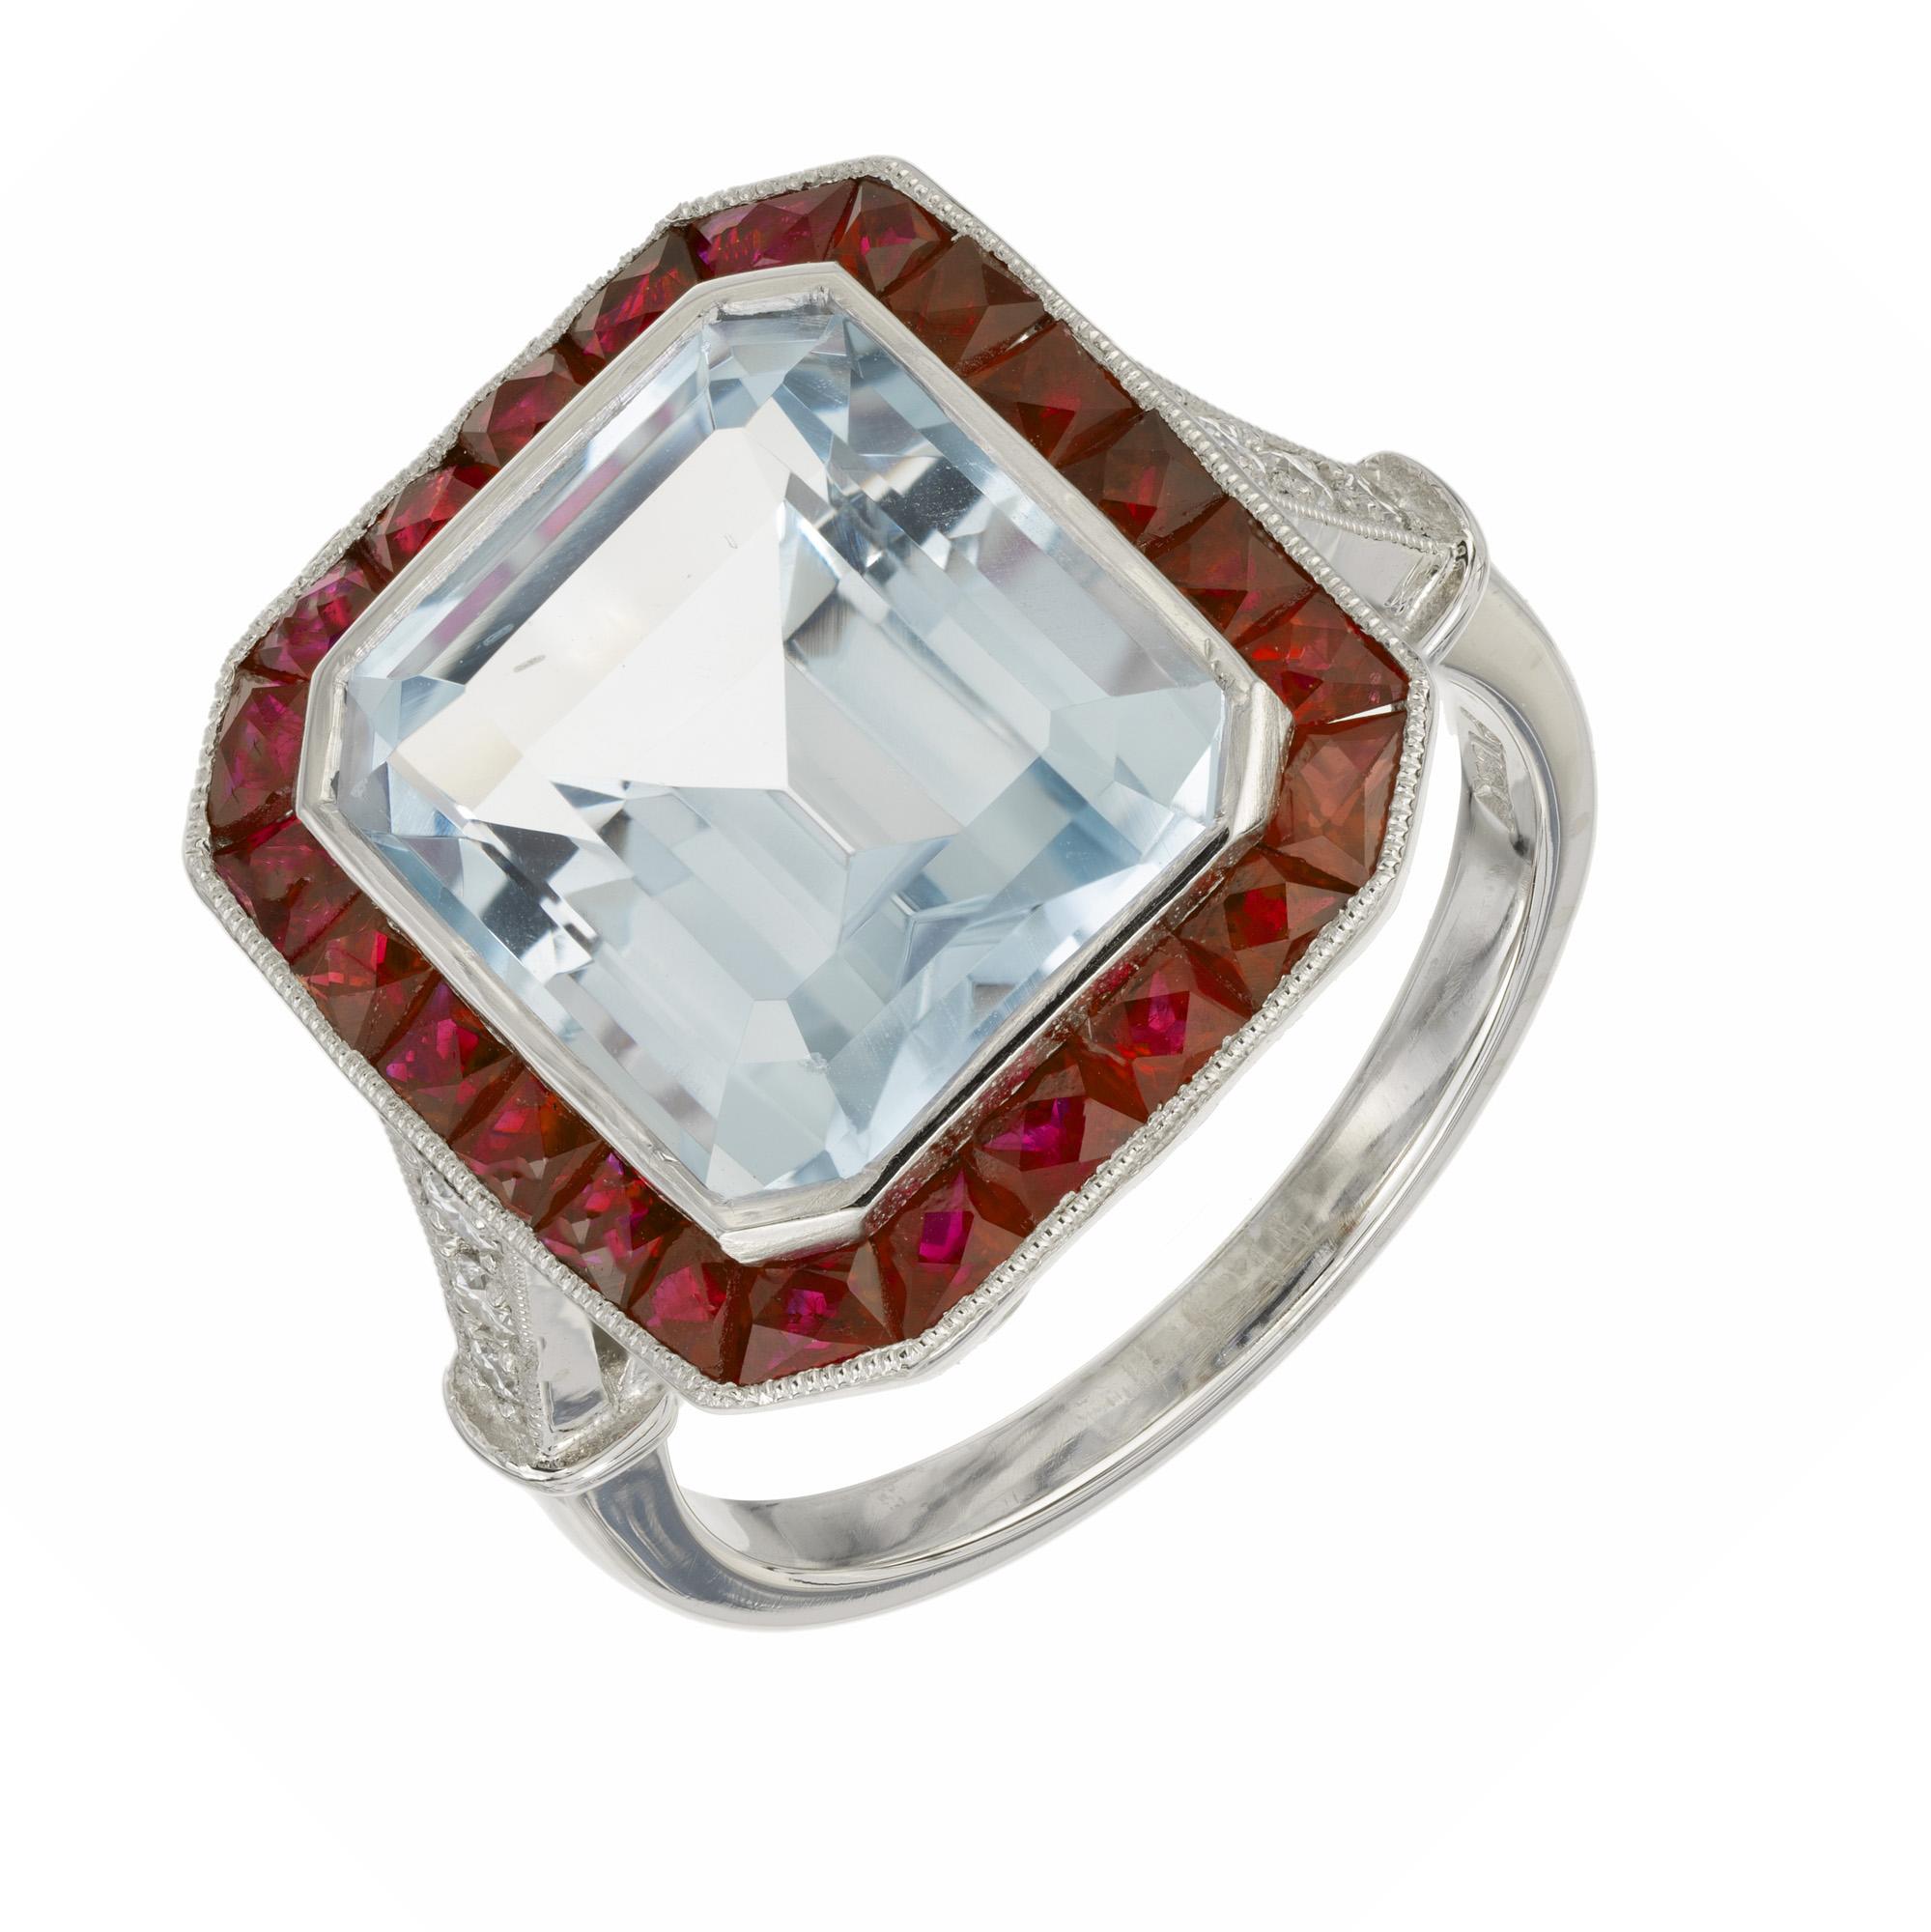 Magnificat 1930's Aqua, ruby and diamond engagement ring. At the center of this Art Deco design is a 10.35ct aquamarine mounted in a platinum setting with a halo of  French cut rubies and accented by 3 round brilliant cut diamonds on each shoulder.